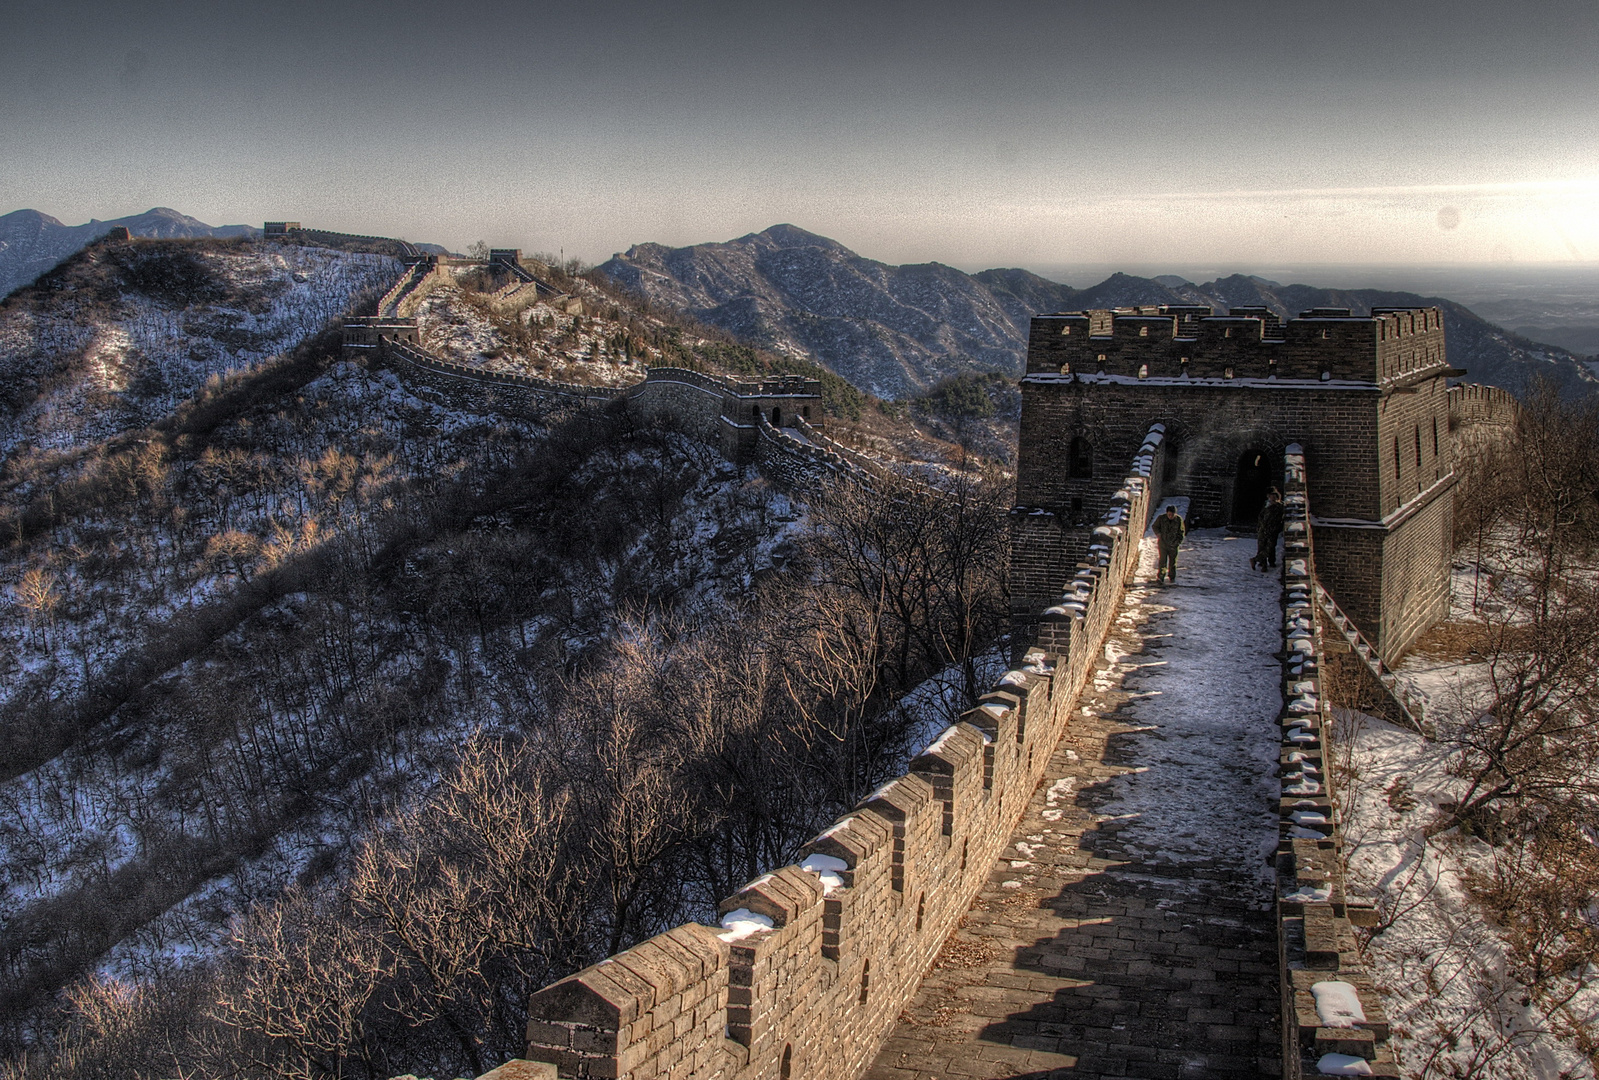 Die Grosse Mauer, the ultimate great wall